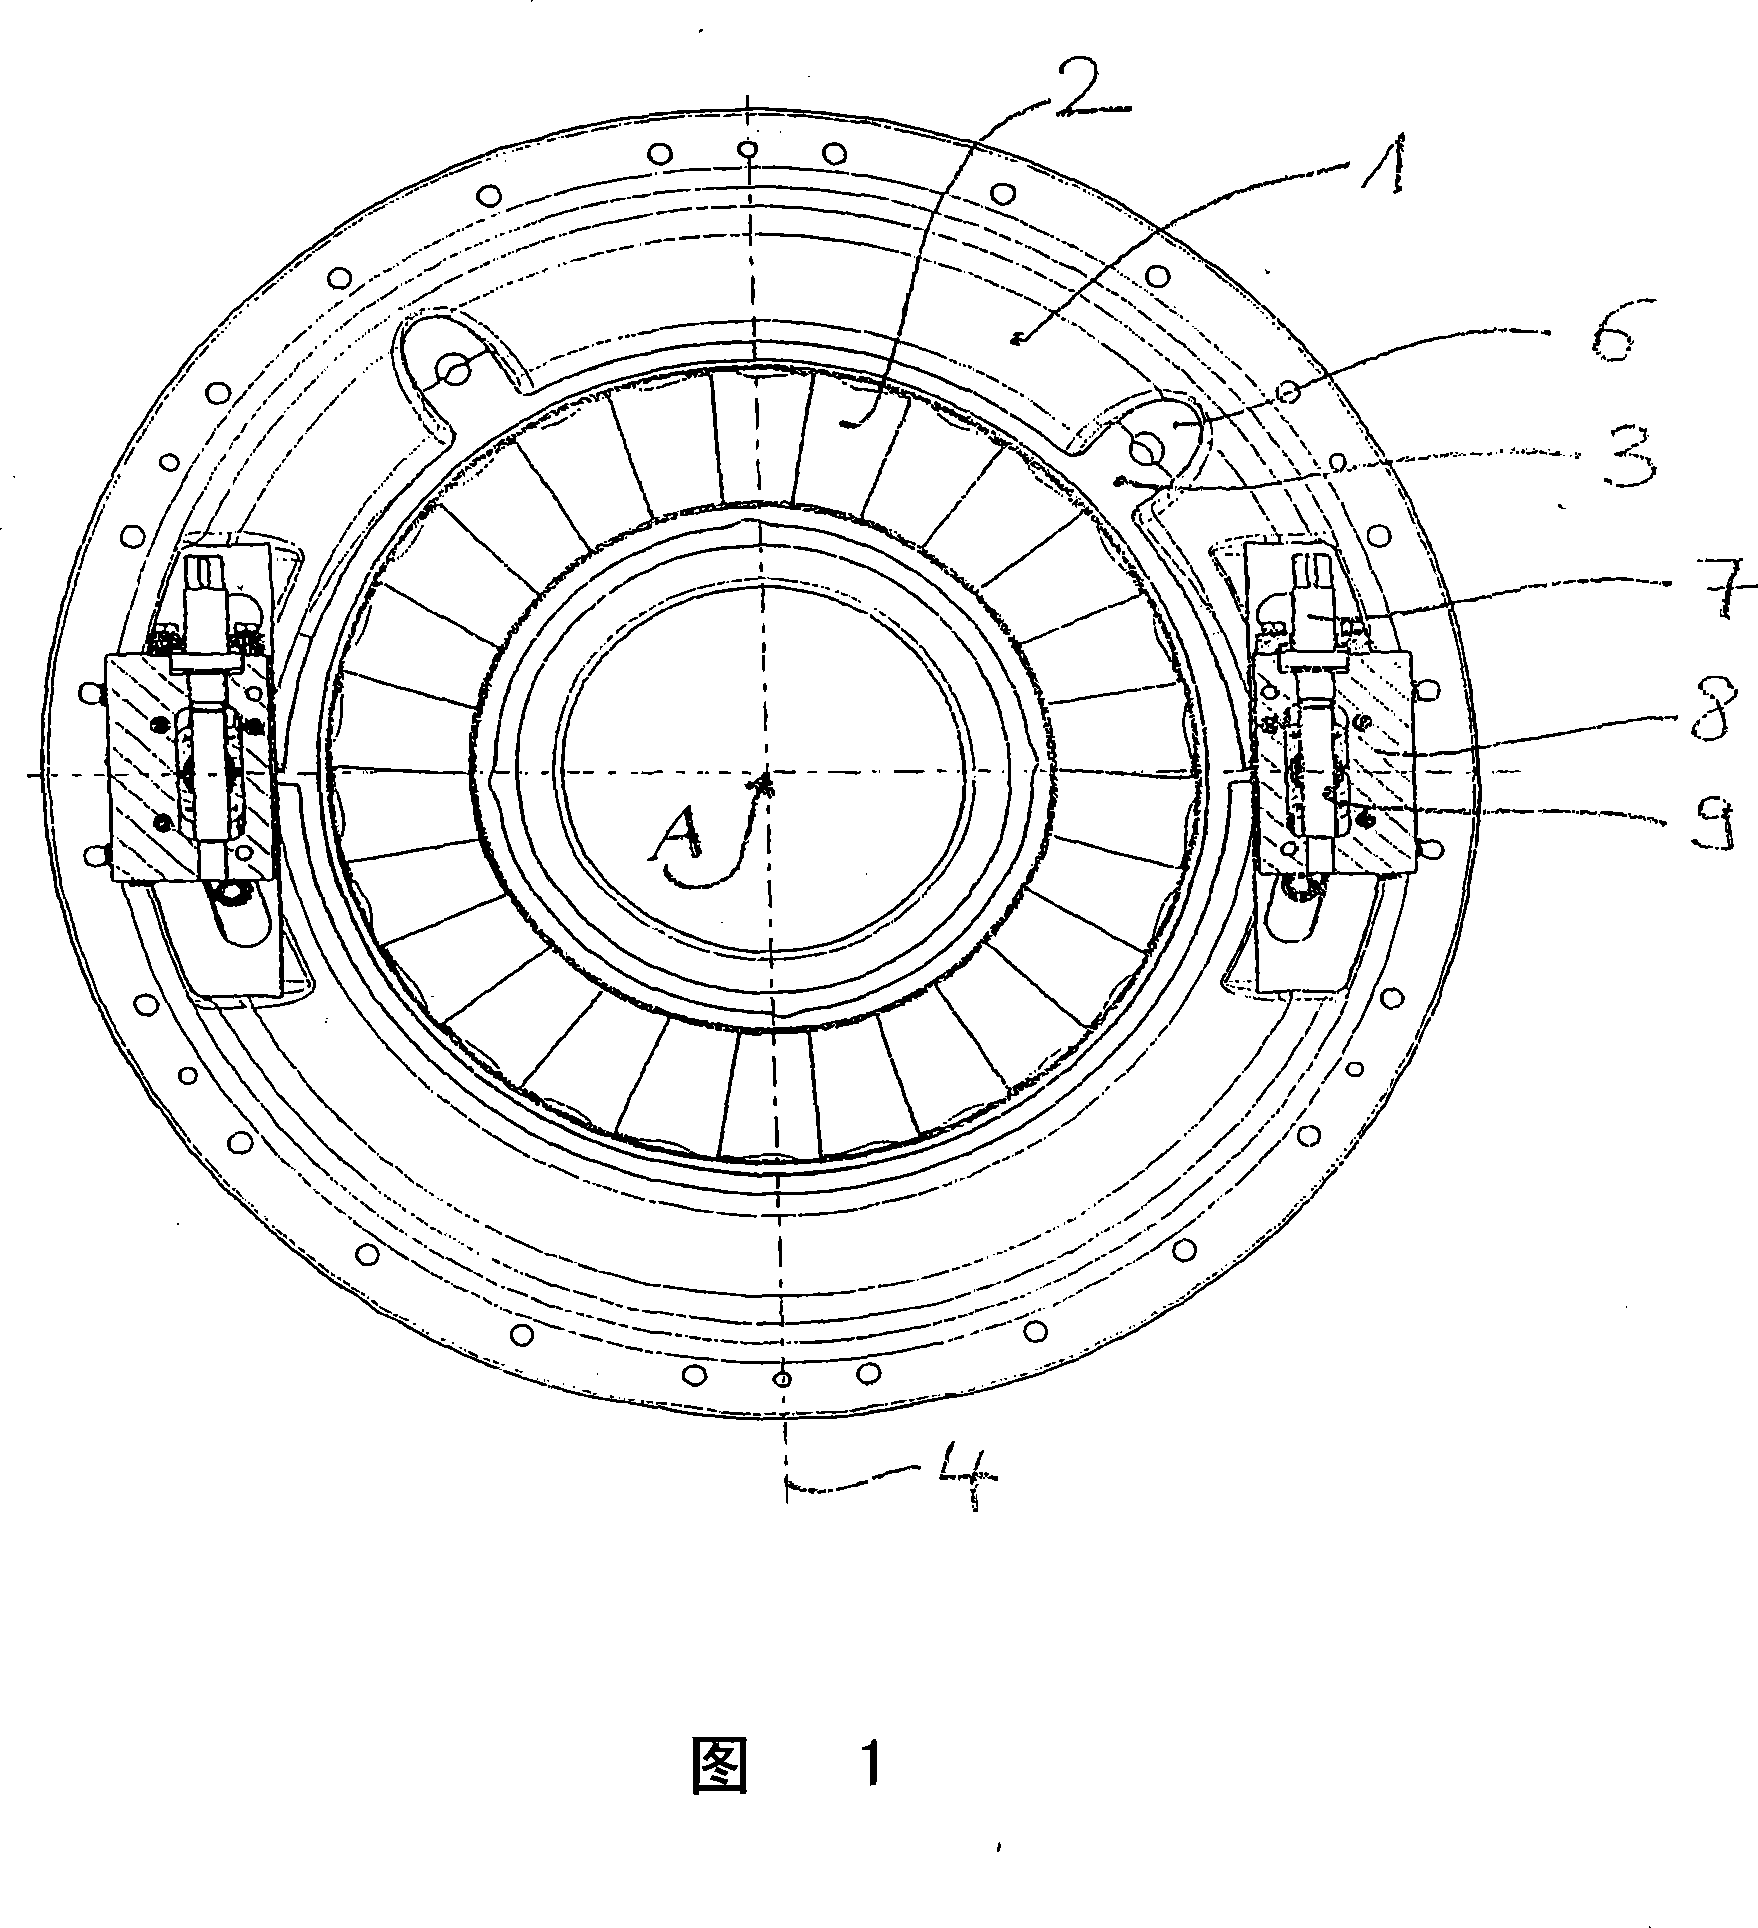 Guiding device for waste gas turbocharger of piston-type internal combustion engine with heavy oil as fuel